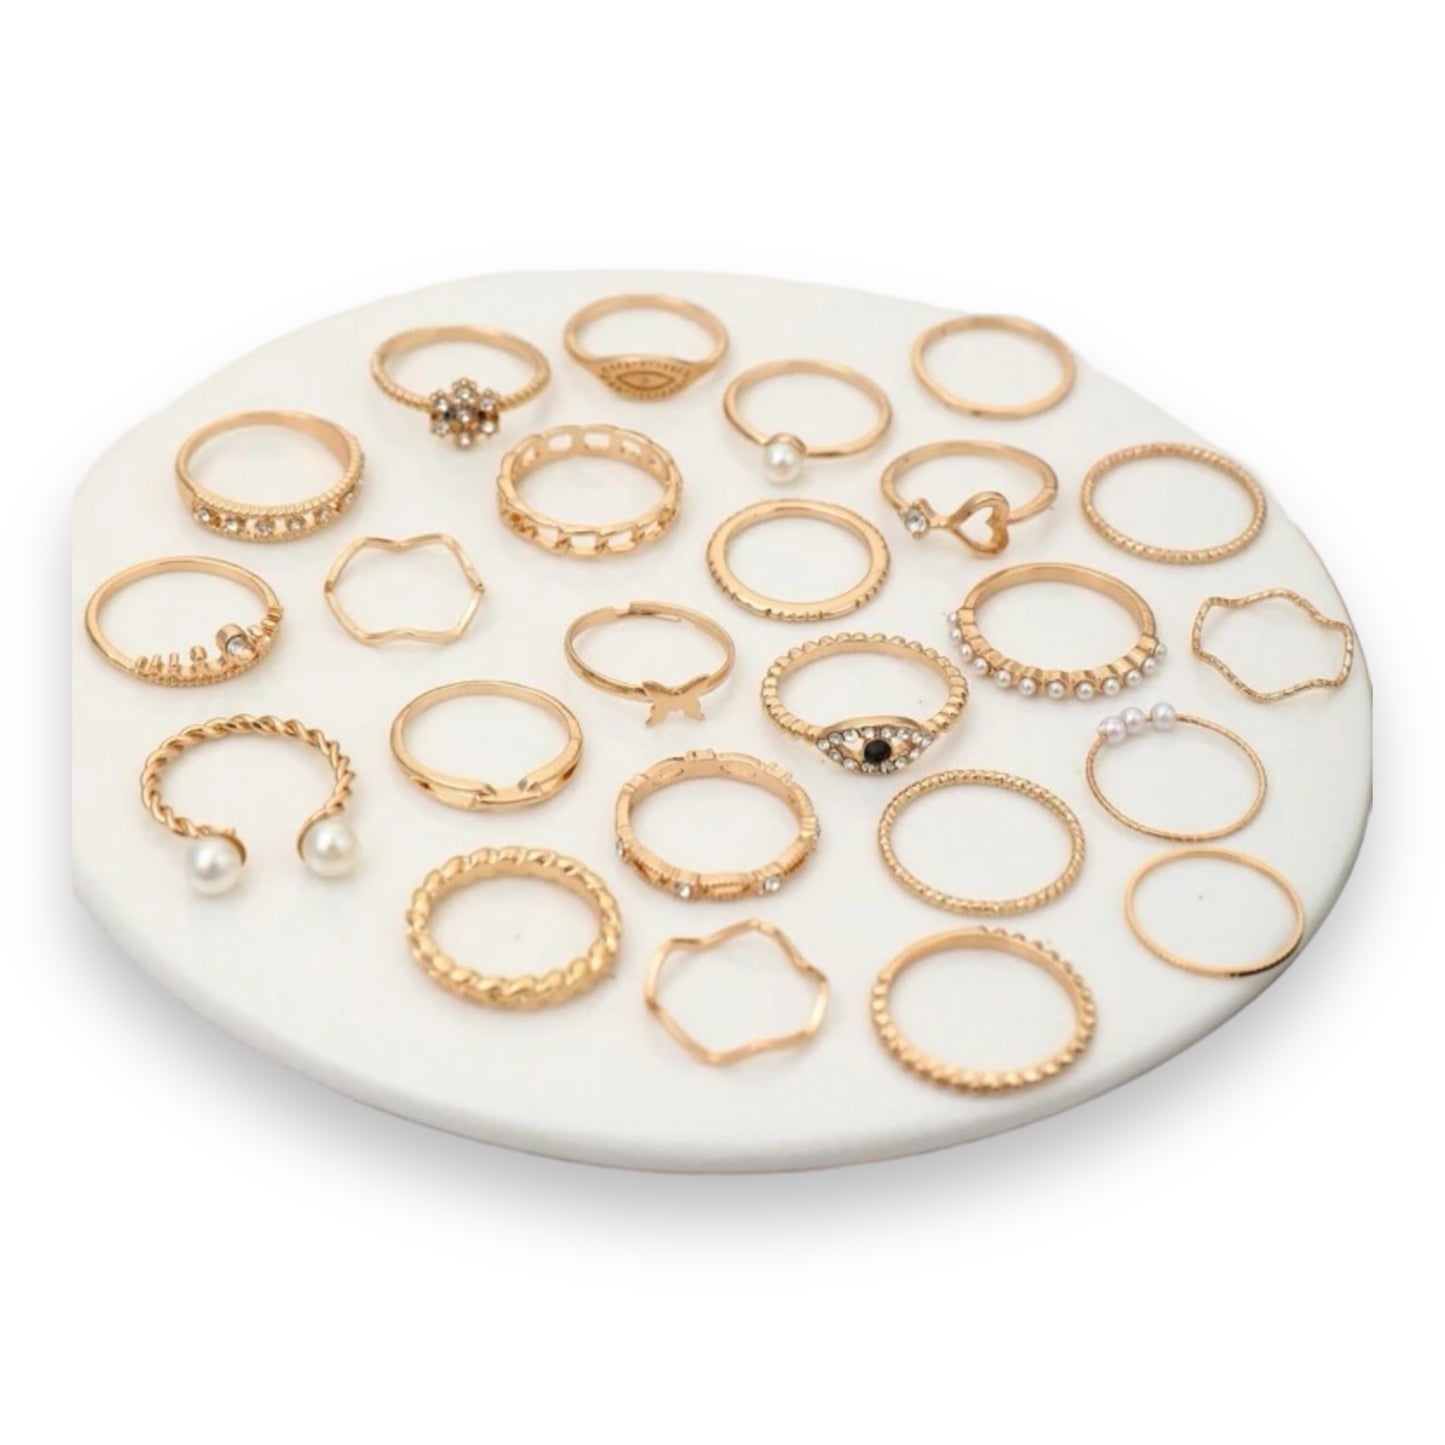 Kinky Pleasure - S028 - Ring Collection Set Gold Or Silver - 24 Pieces